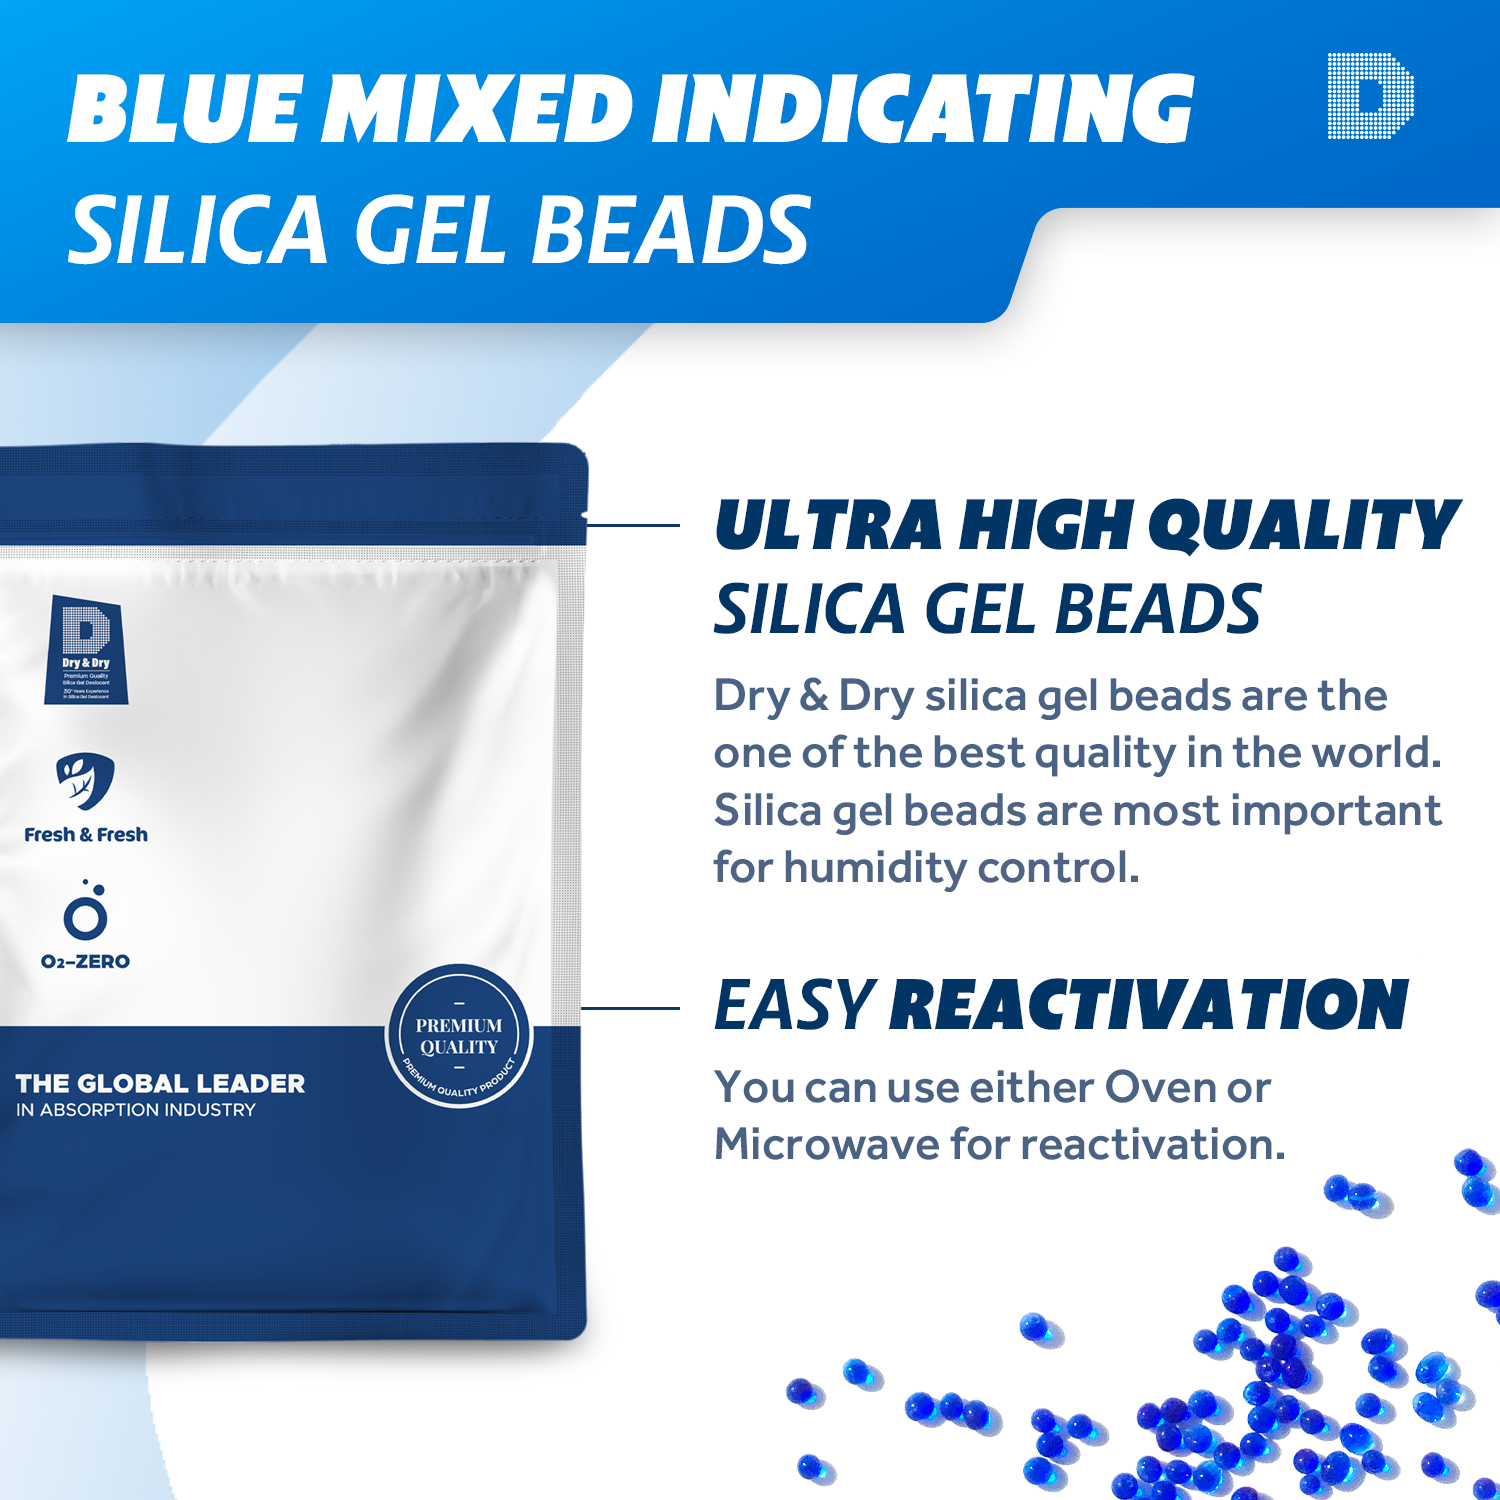 5 LBS Indicating "Dry&Dry" Silica Gel Beads Mixed Blue for Air Dryer - Bulk Resuable Color Changing